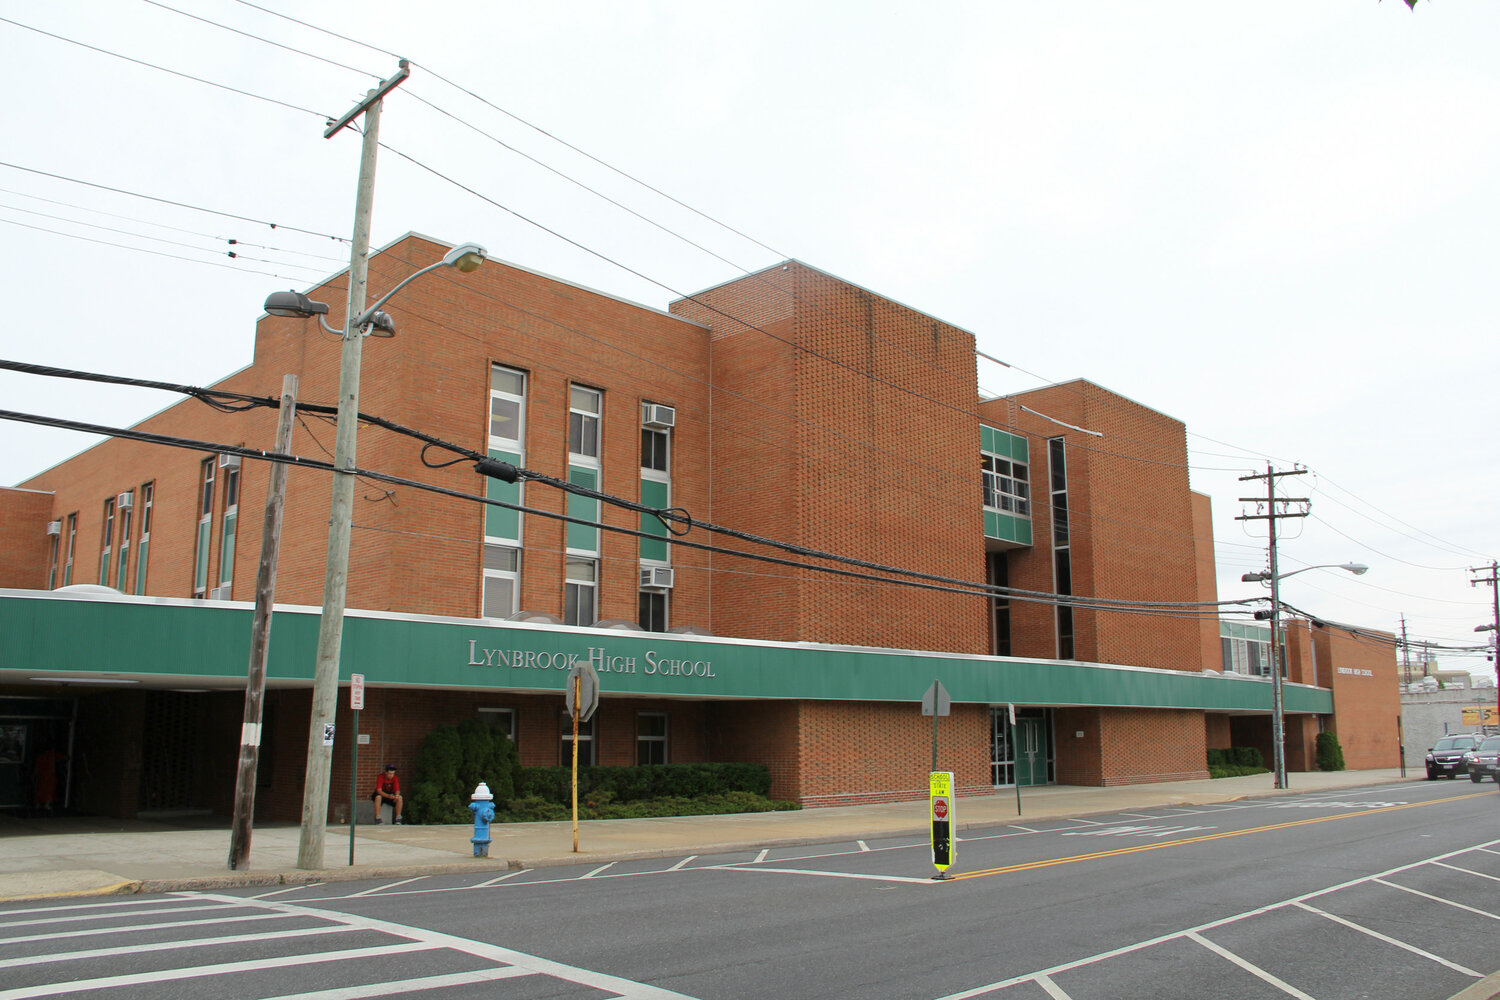 The SATs will be administered online beginning this spring. The shorter test and digital interface will hopefully make students feel more comfortable, Matthew Sarosy and Richard Schaffer, principals of Lynbrook and East Rockaway High Schools respectively, said.